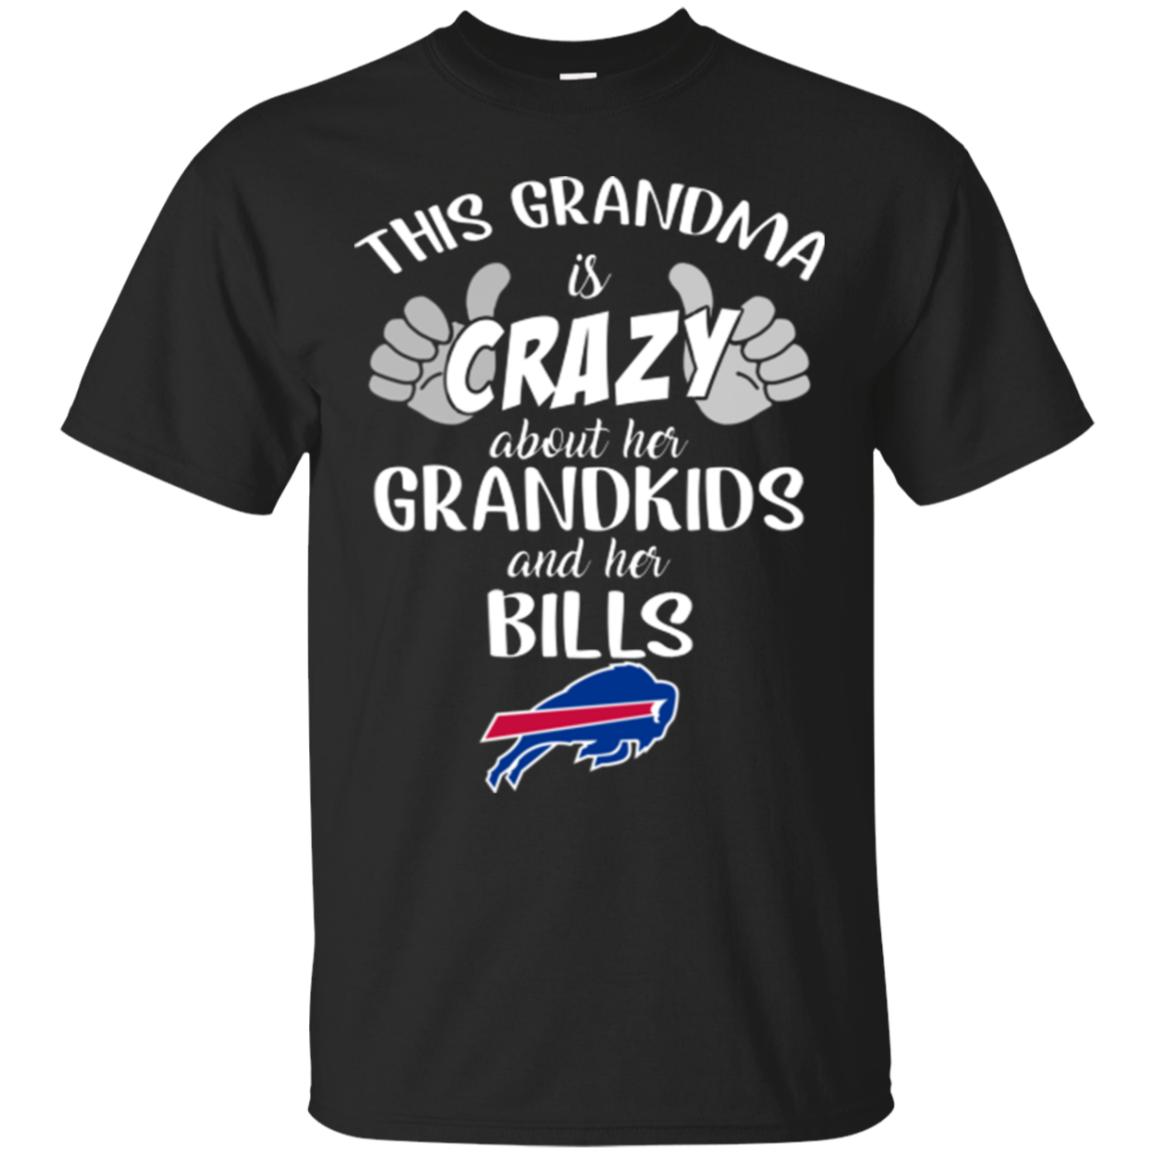 This Grandma Is Crazy About Her Grandkids And Her Bills T-Shirt